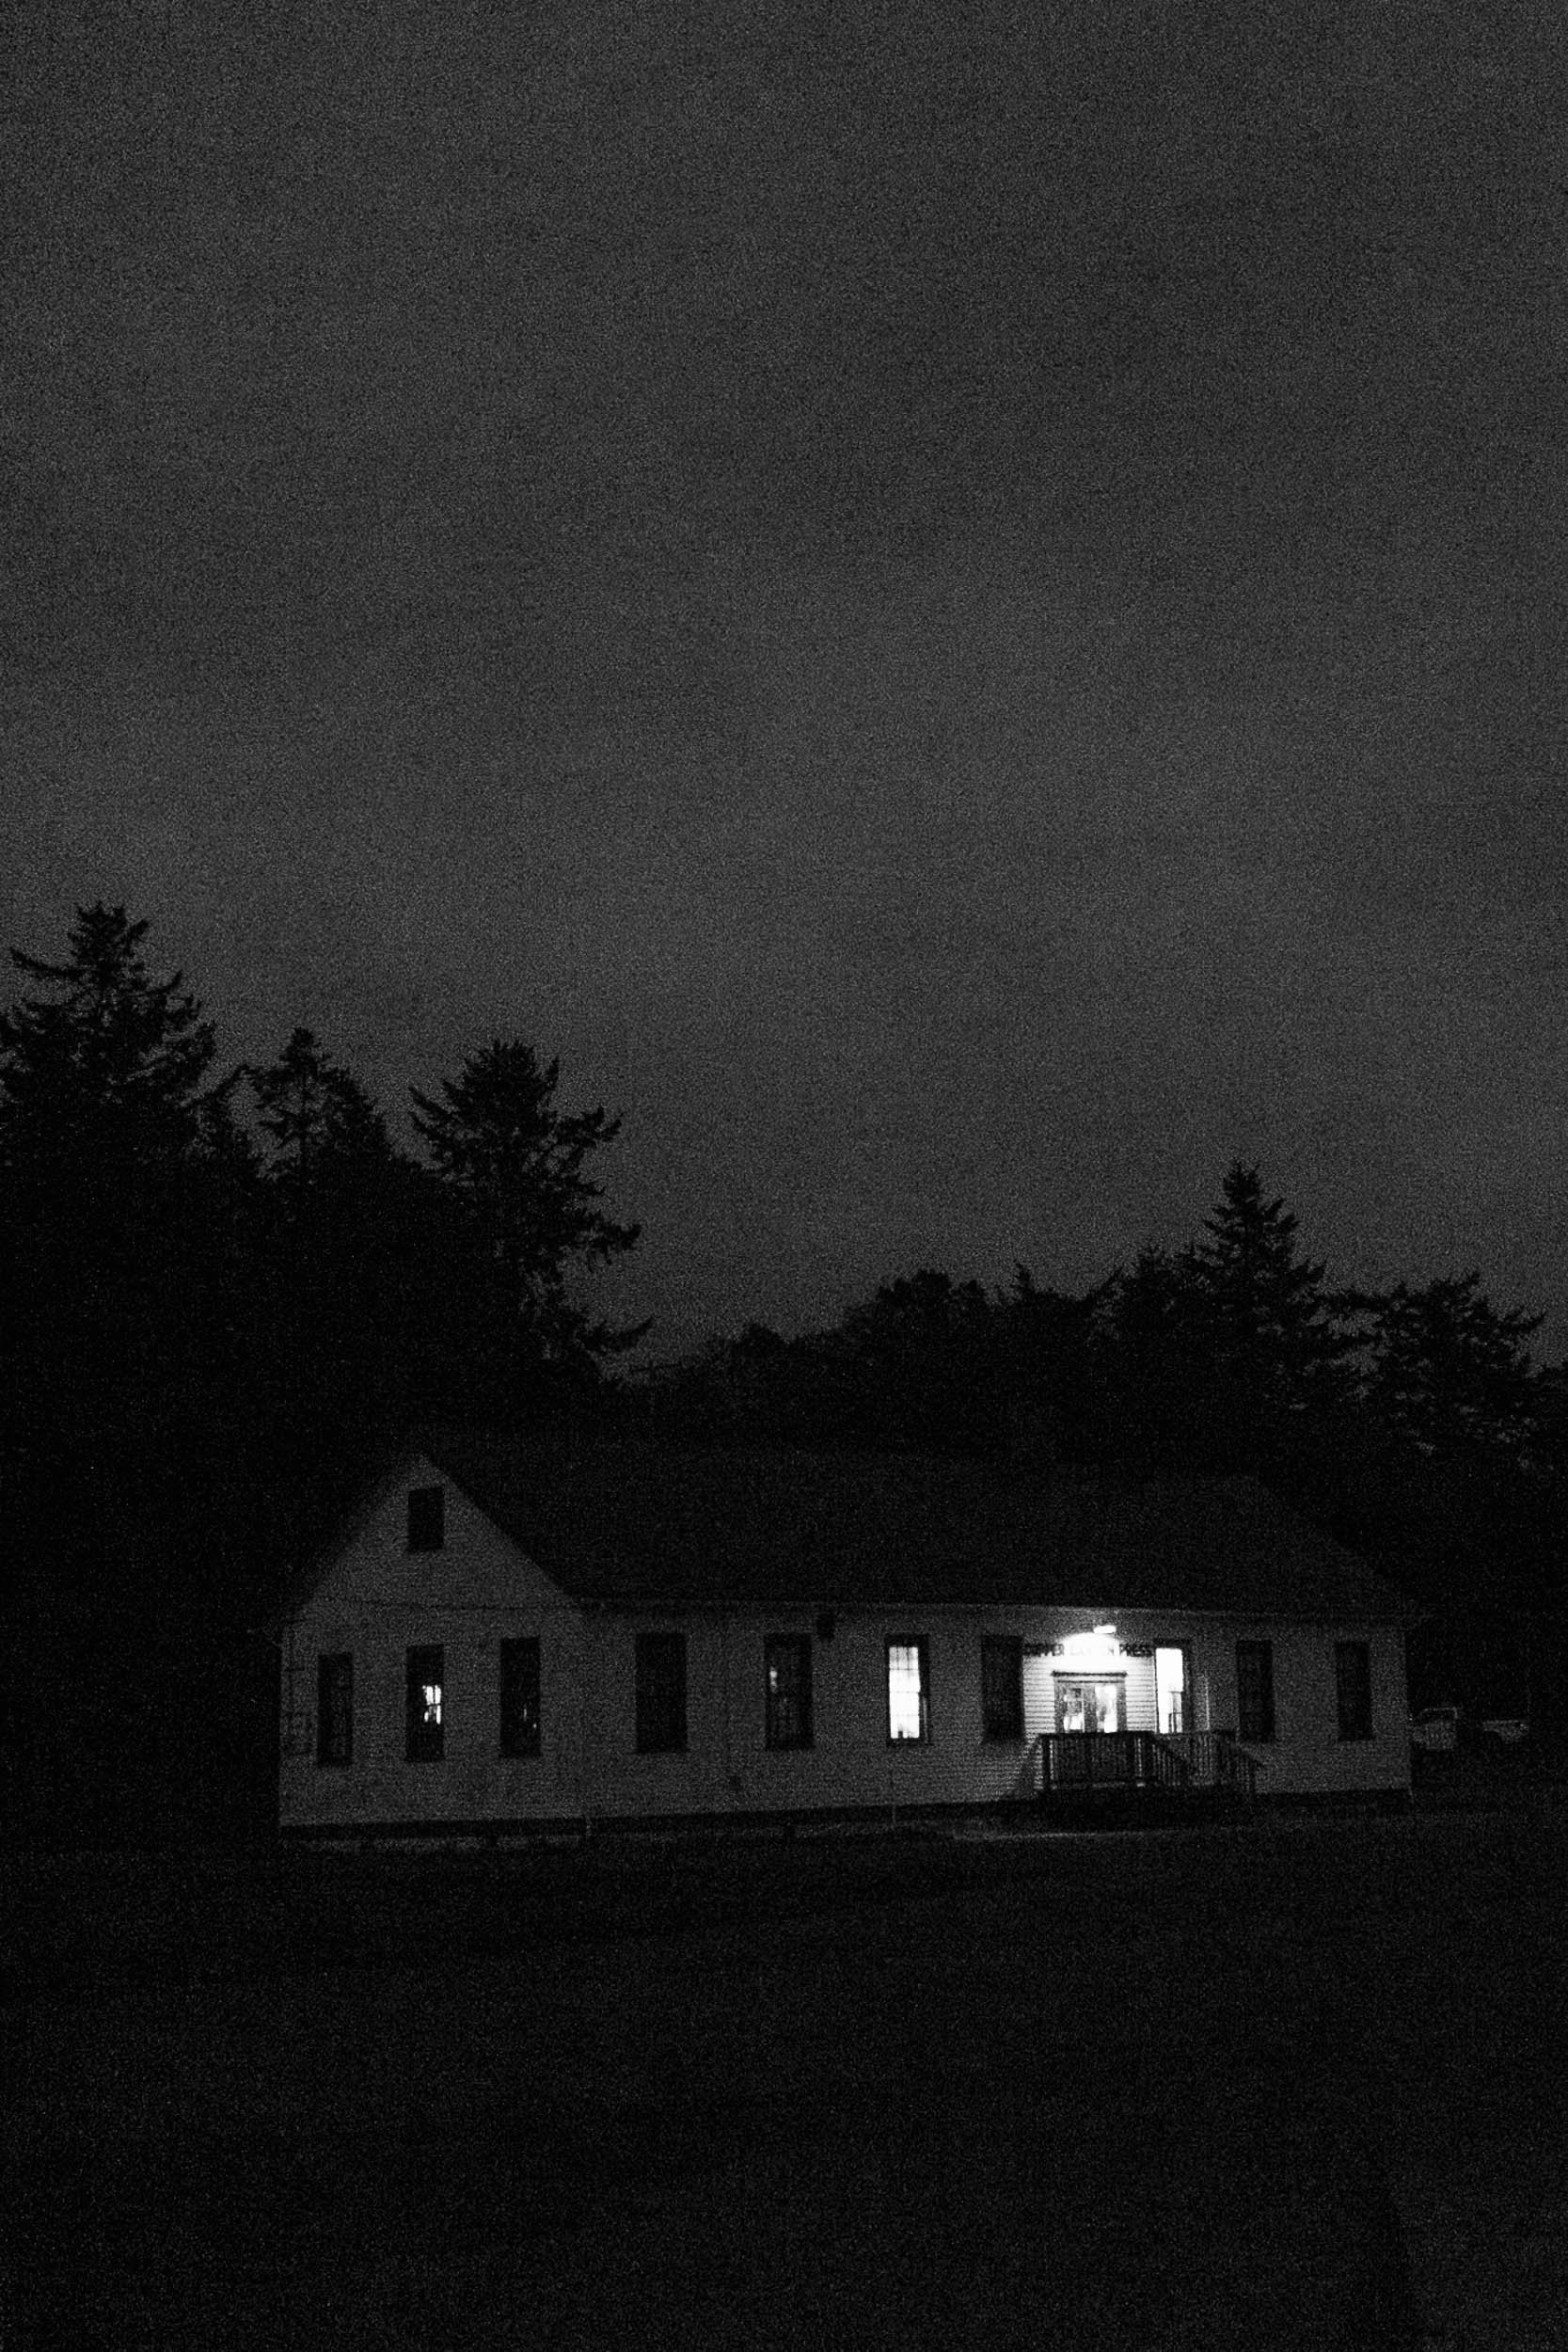 At night: Copper Canyon Press at Fort Worden